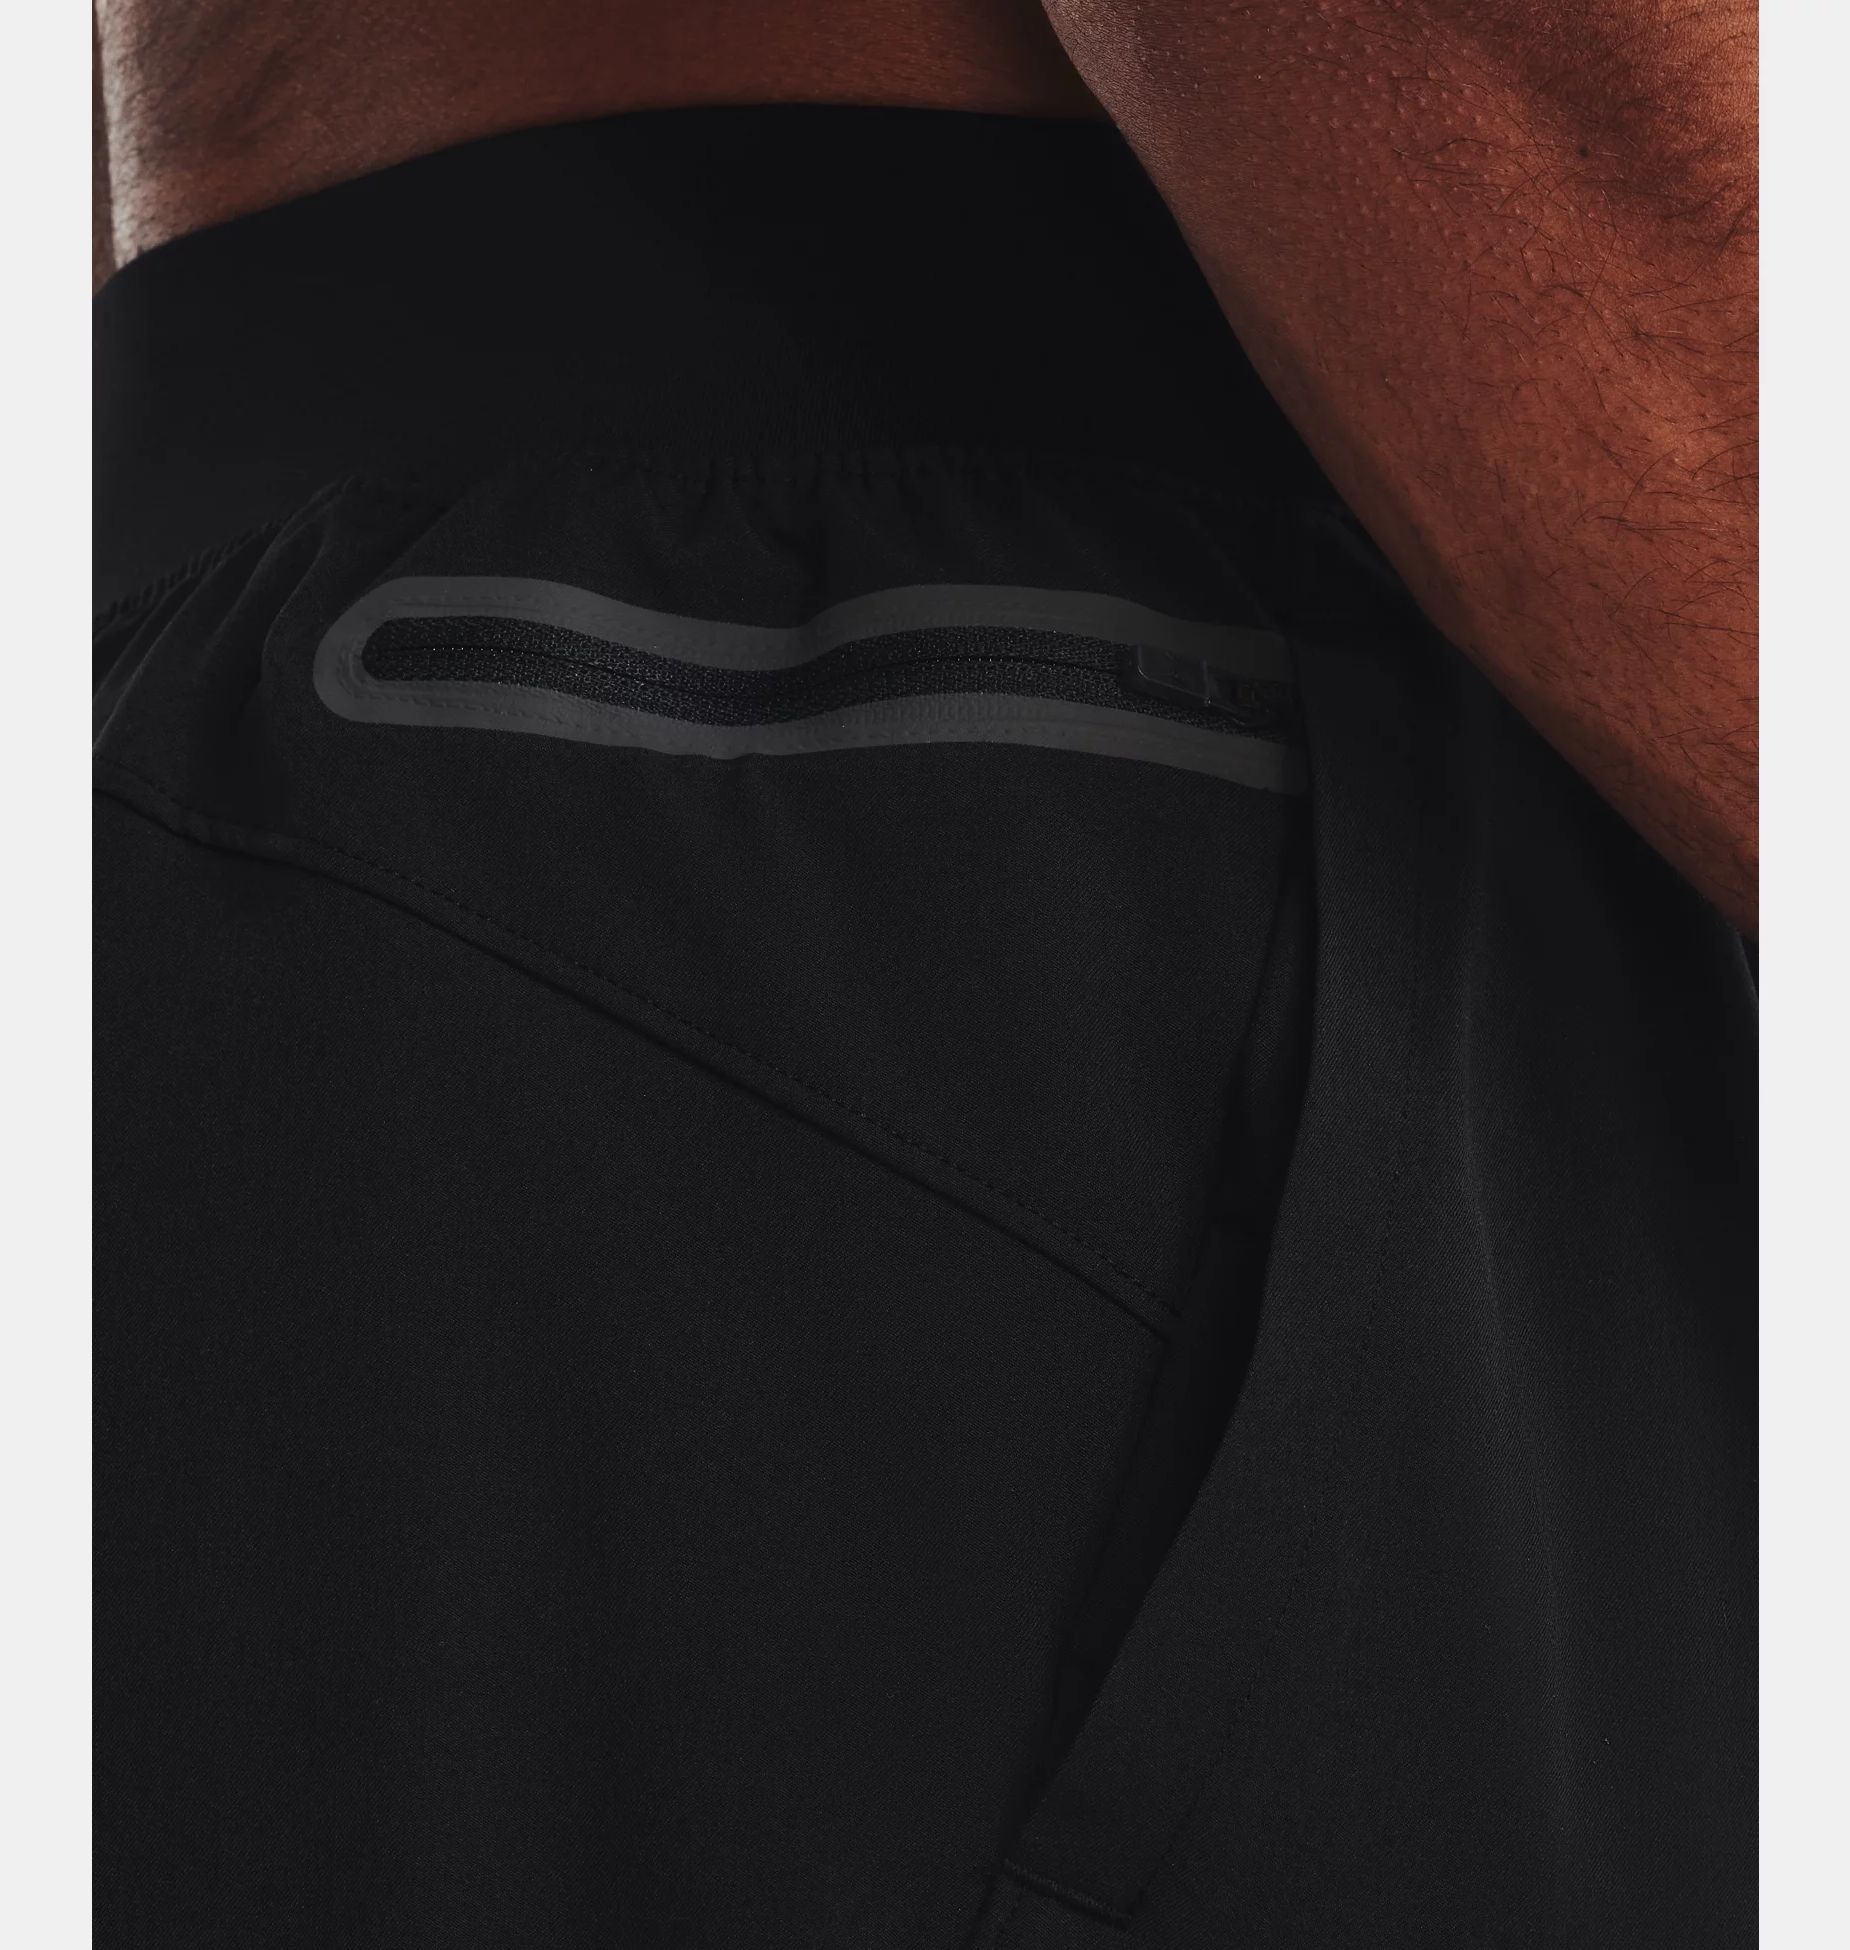 Shorts -  under armour Unstoppable Cargo Shorts